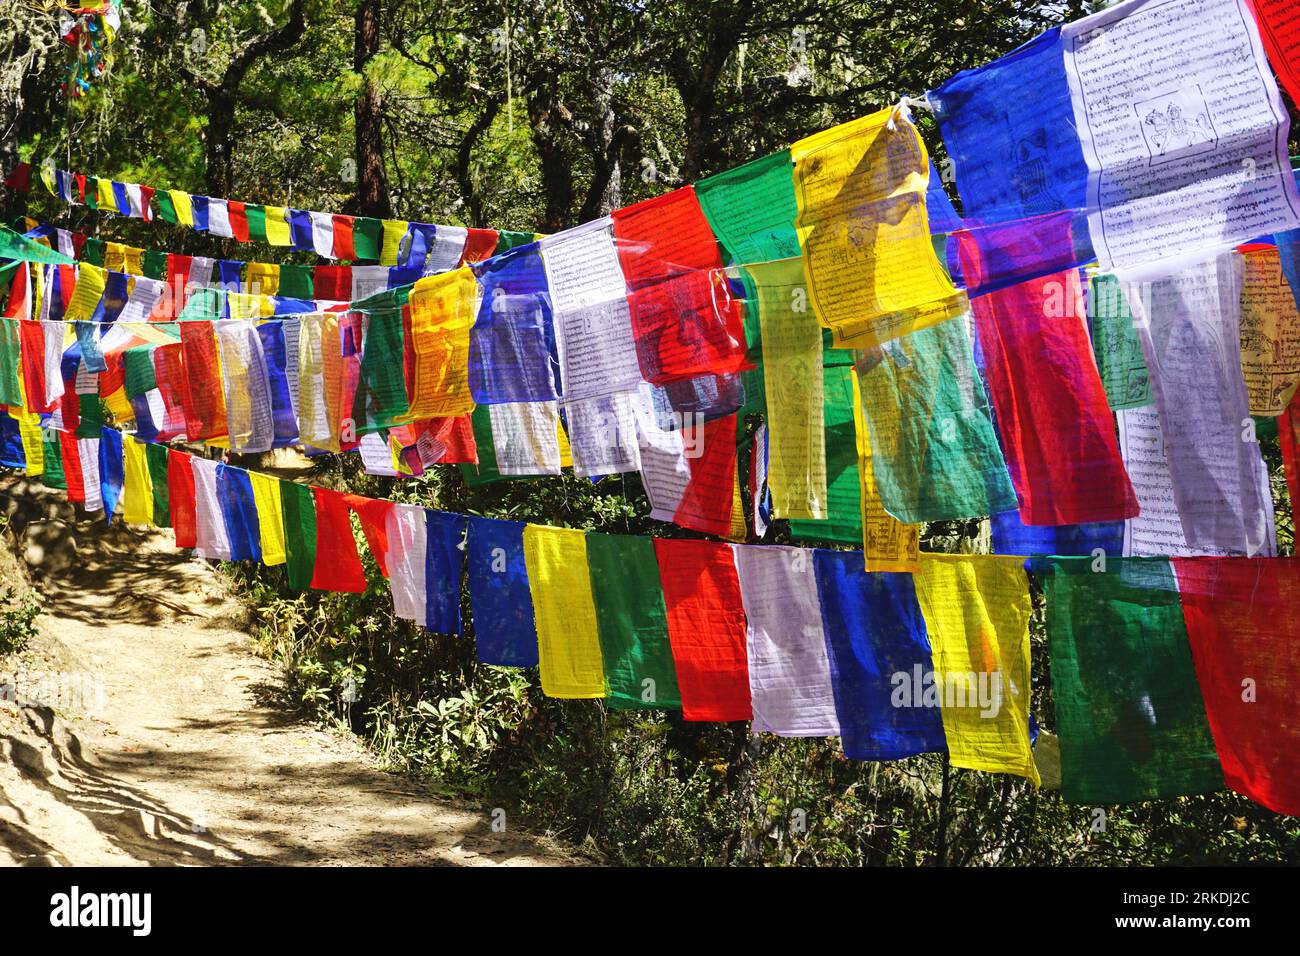 A curtain of colorful prayer flags hangs among the trees along the trail to the Tiger's Nest Monastery in rural Bhutan on a sunny fall morning Stock Photo